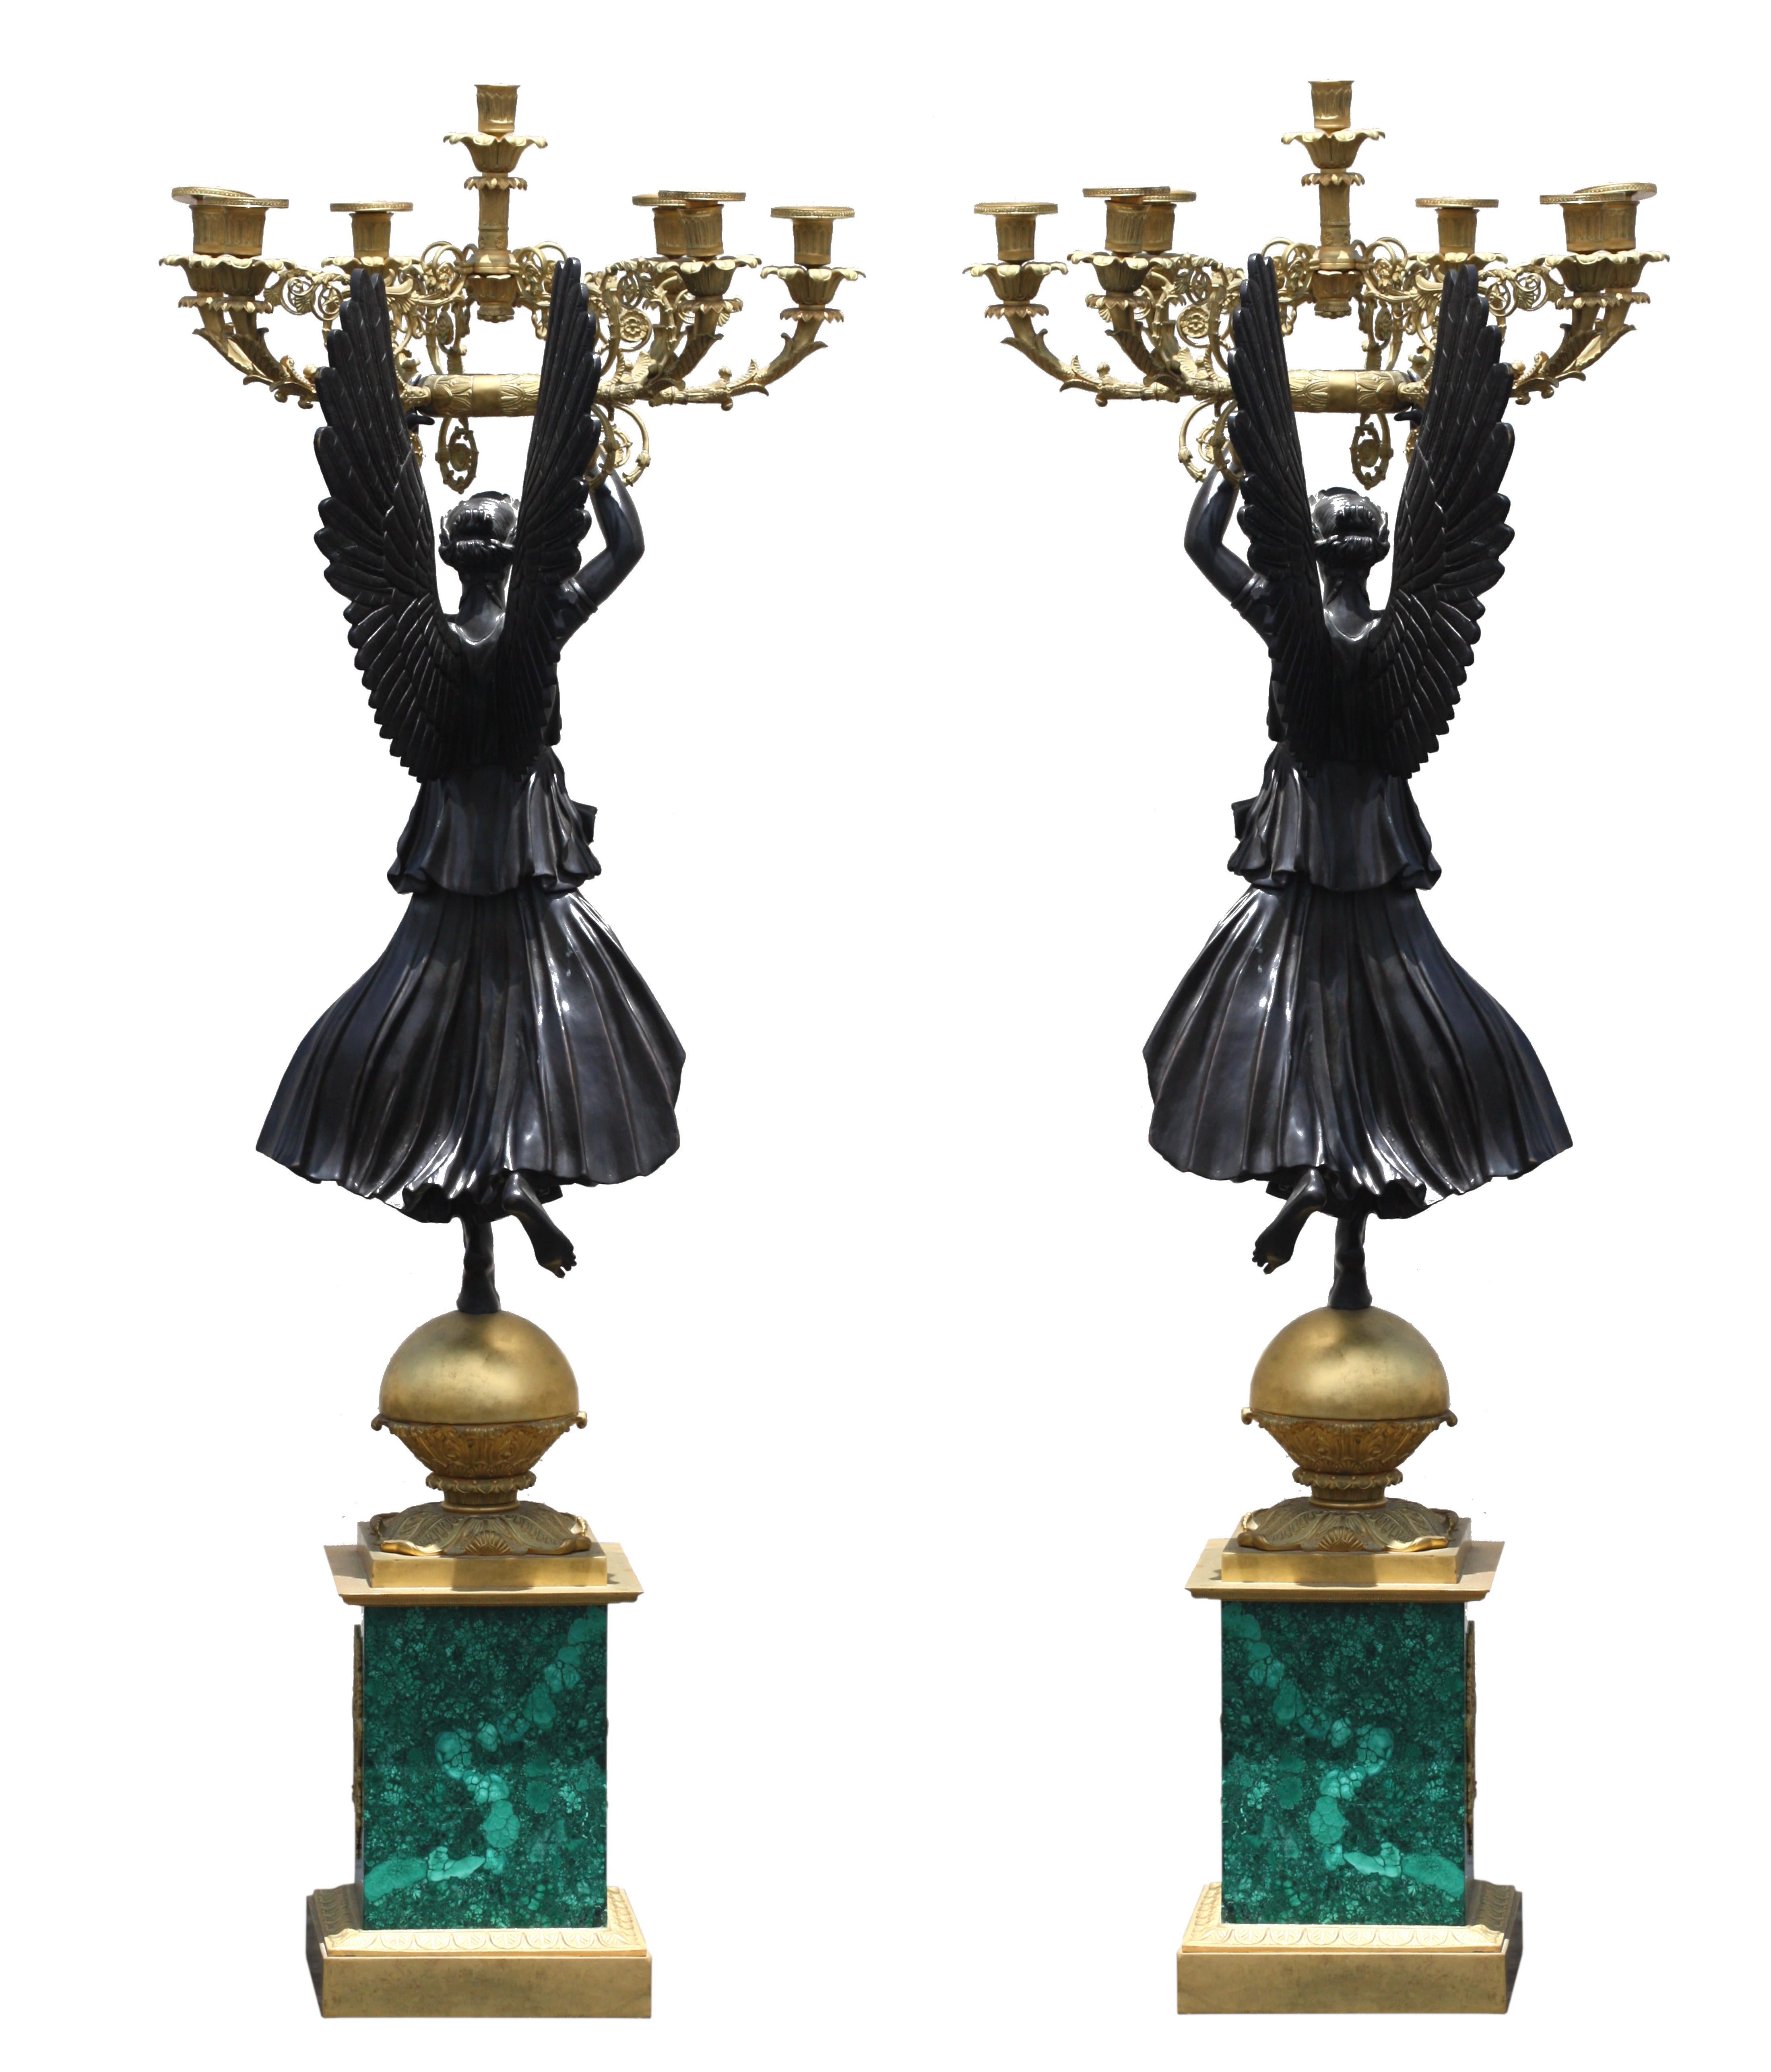 A Pair of Bronze and Malachite candelabra
Empire Style, 20th Century, with seven foliate lights, held by a Renommée on a sphere, on a quadrangular malachite base, Height 52 in. (132.08 cm.), 19 inches across (48.26 cm.).
 